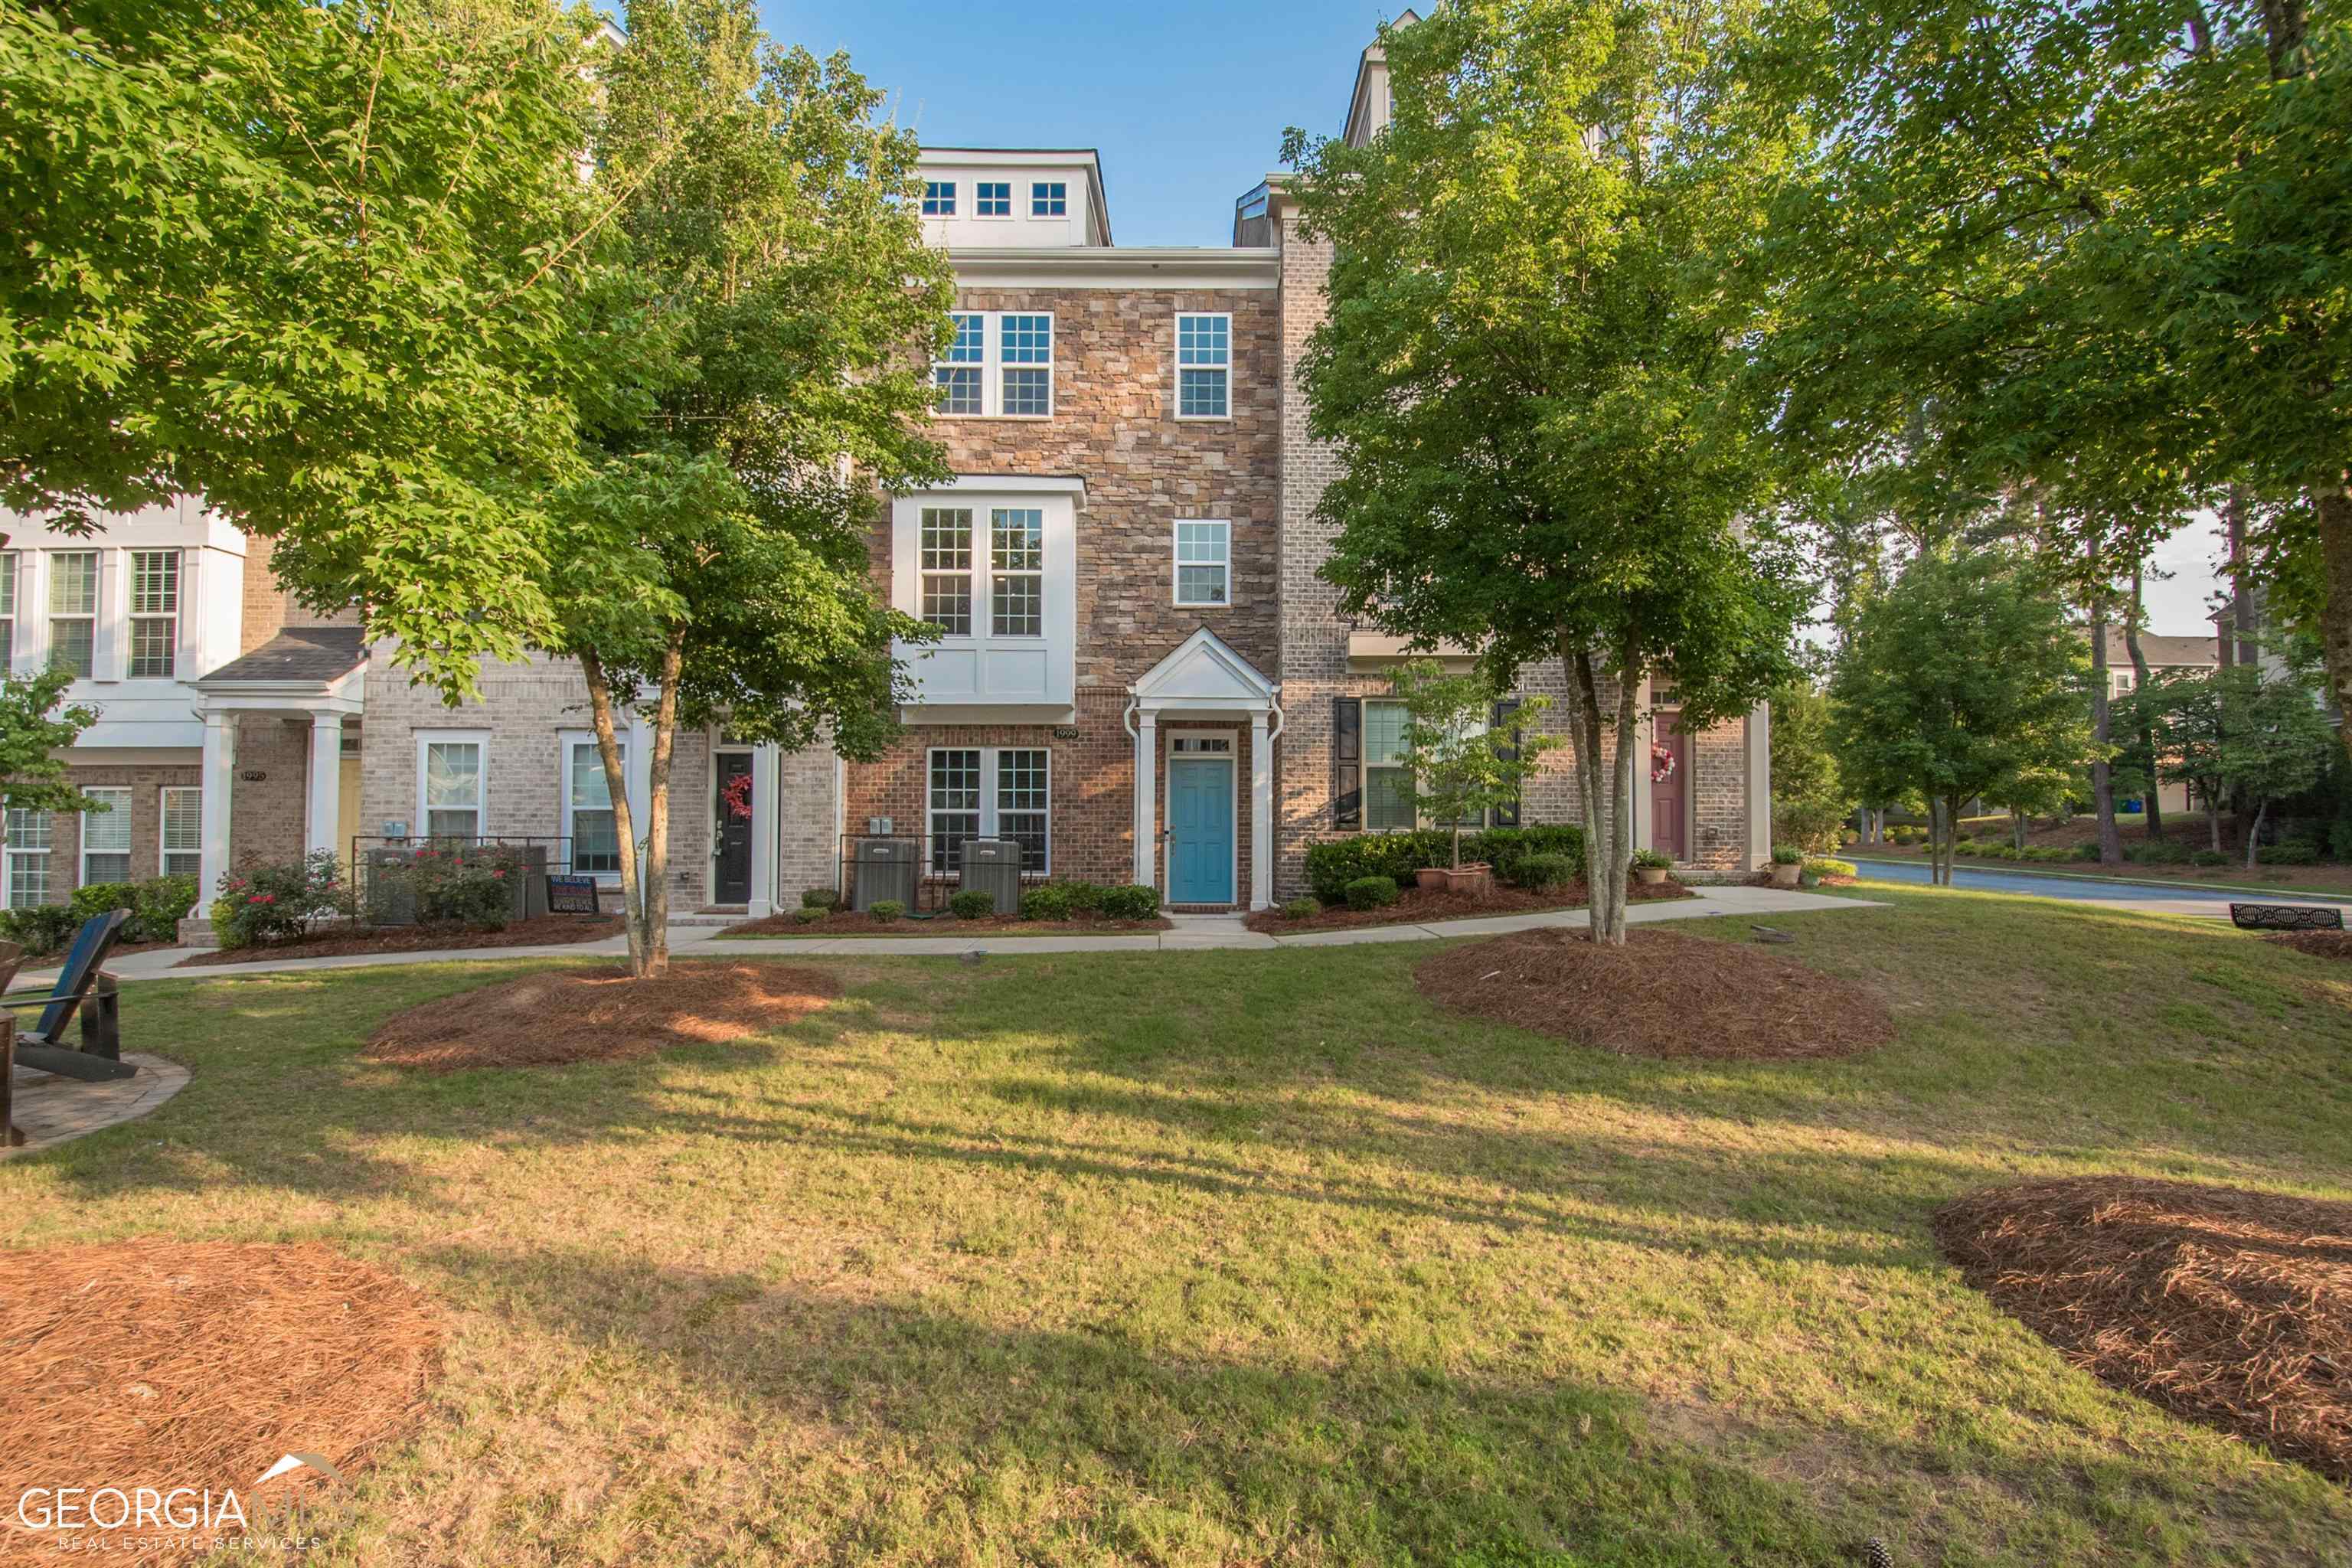 View Decatur, GA 30033 townhome